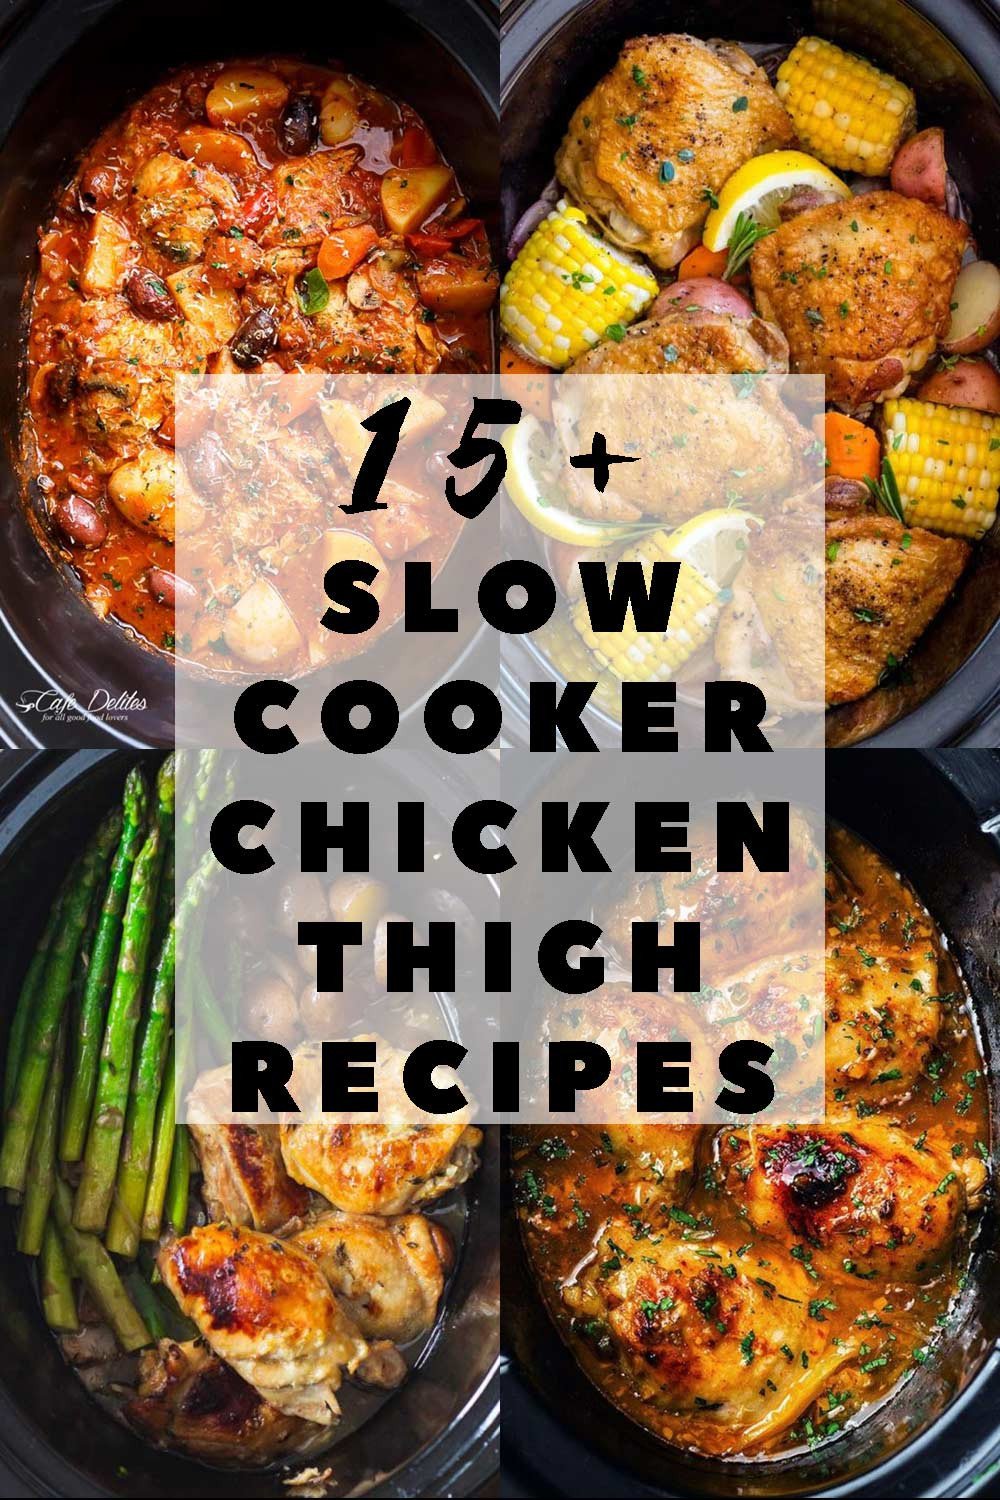 Recipes Using Chicken Thighs
 The 15 Best Slow Cooker Chicken Thigh Recipes Green